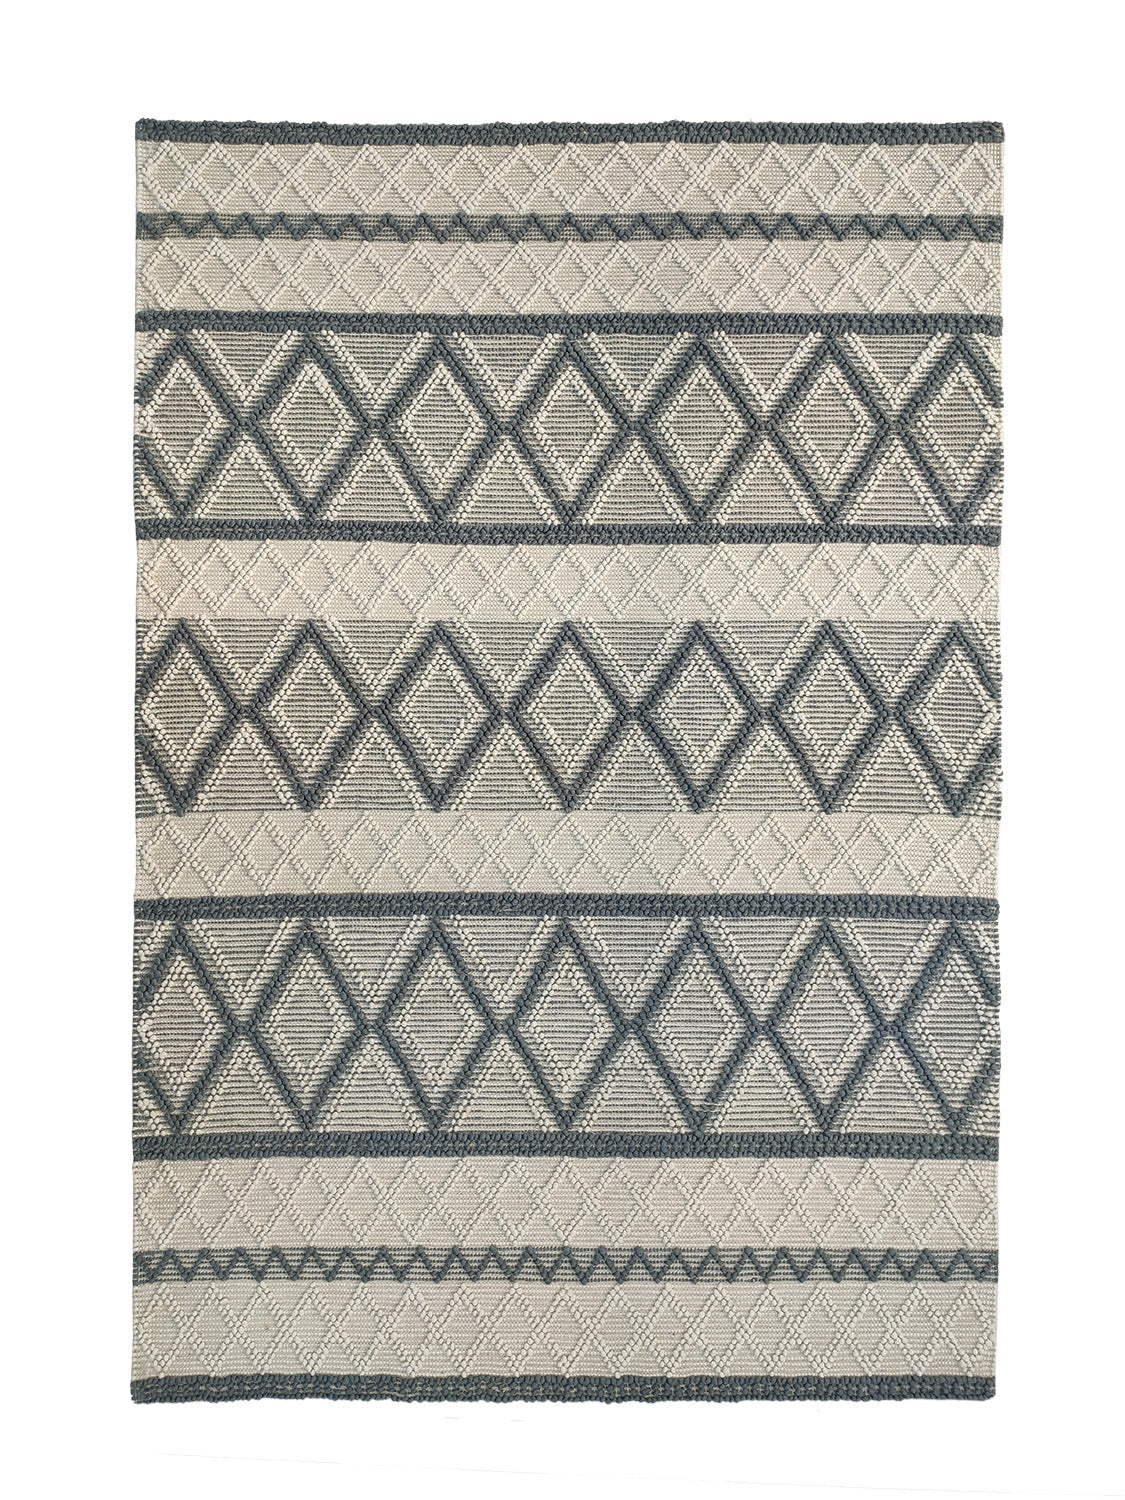 Hand Made Patterned Home Decor Woven Rug (2 Sizes)